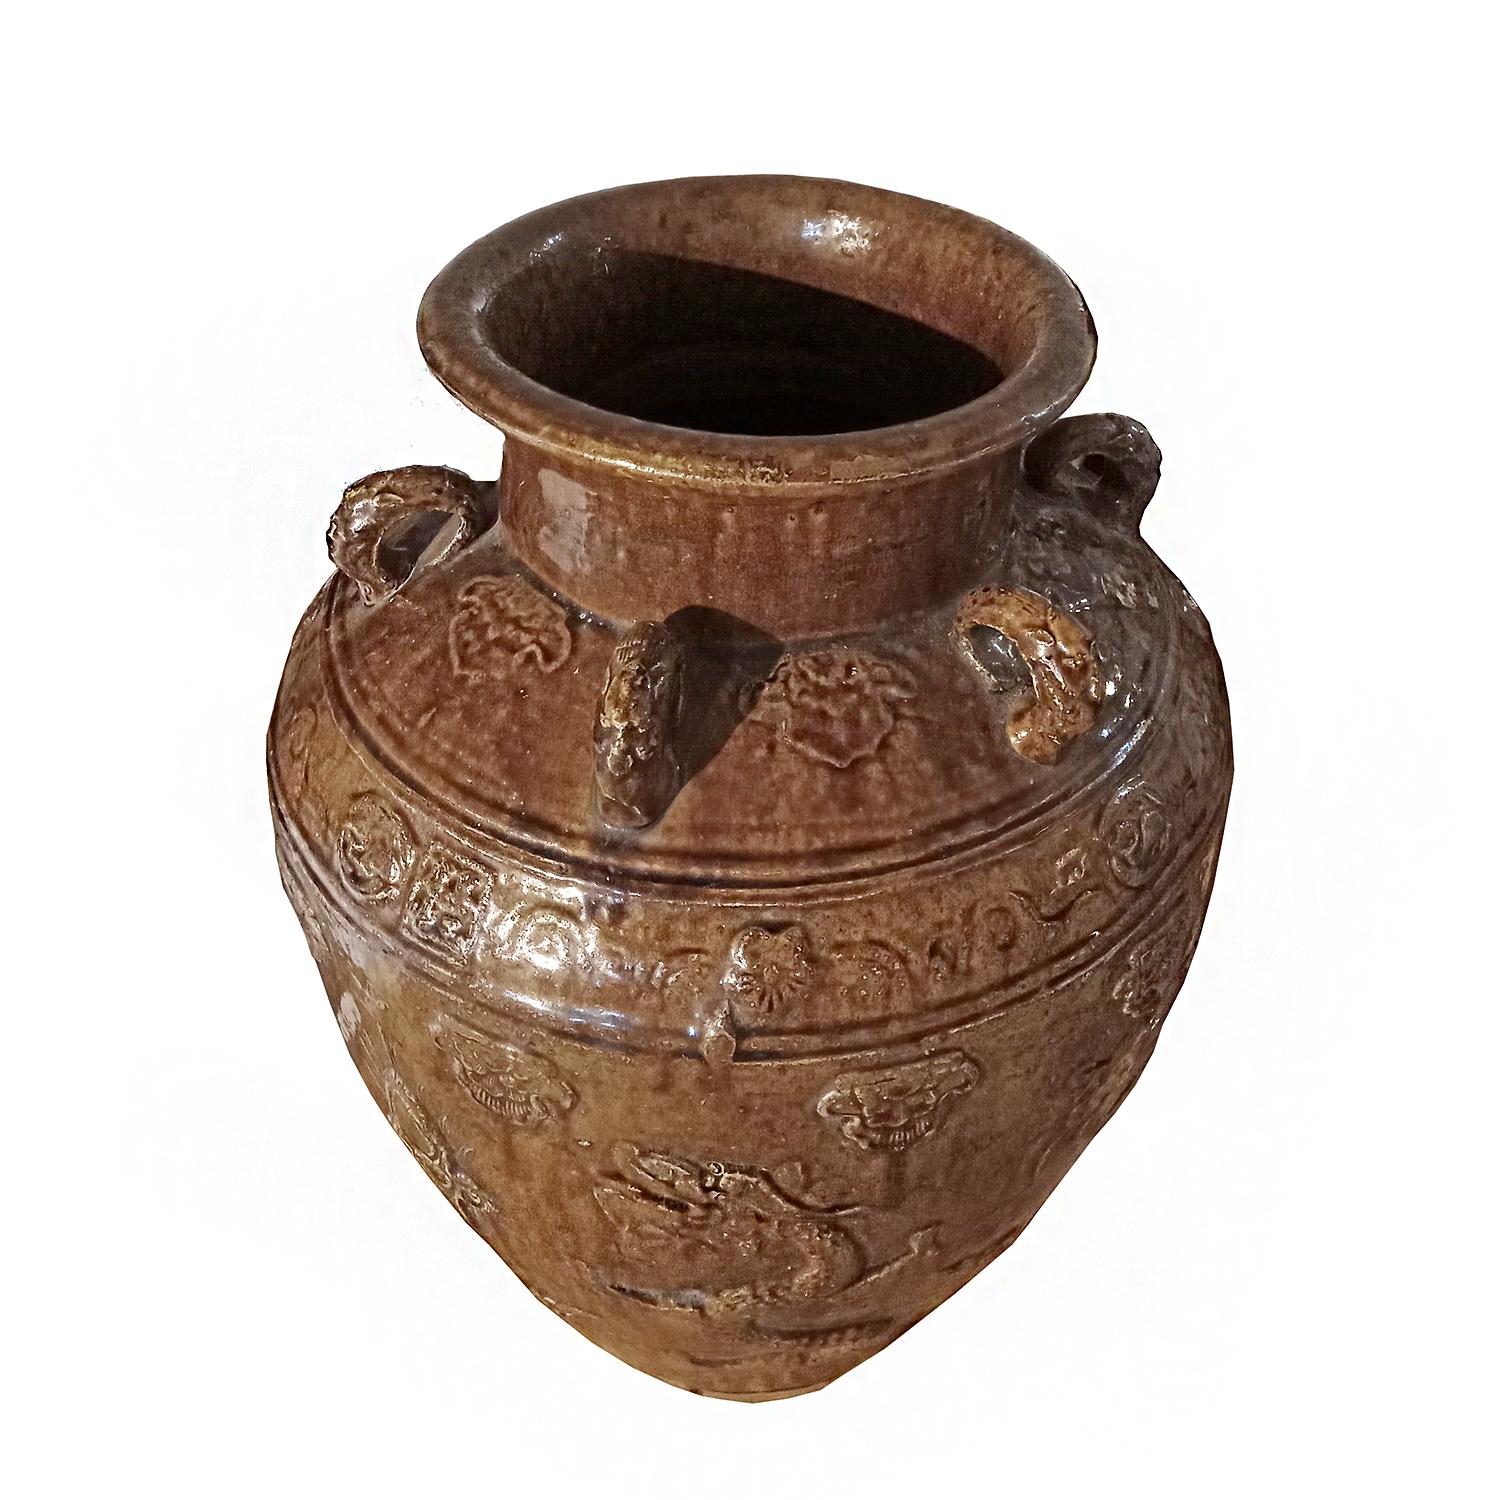 Other Indonesian Terracotta Urn / Jar / Vase with Brown Glaze and Dragon Motif For Sale